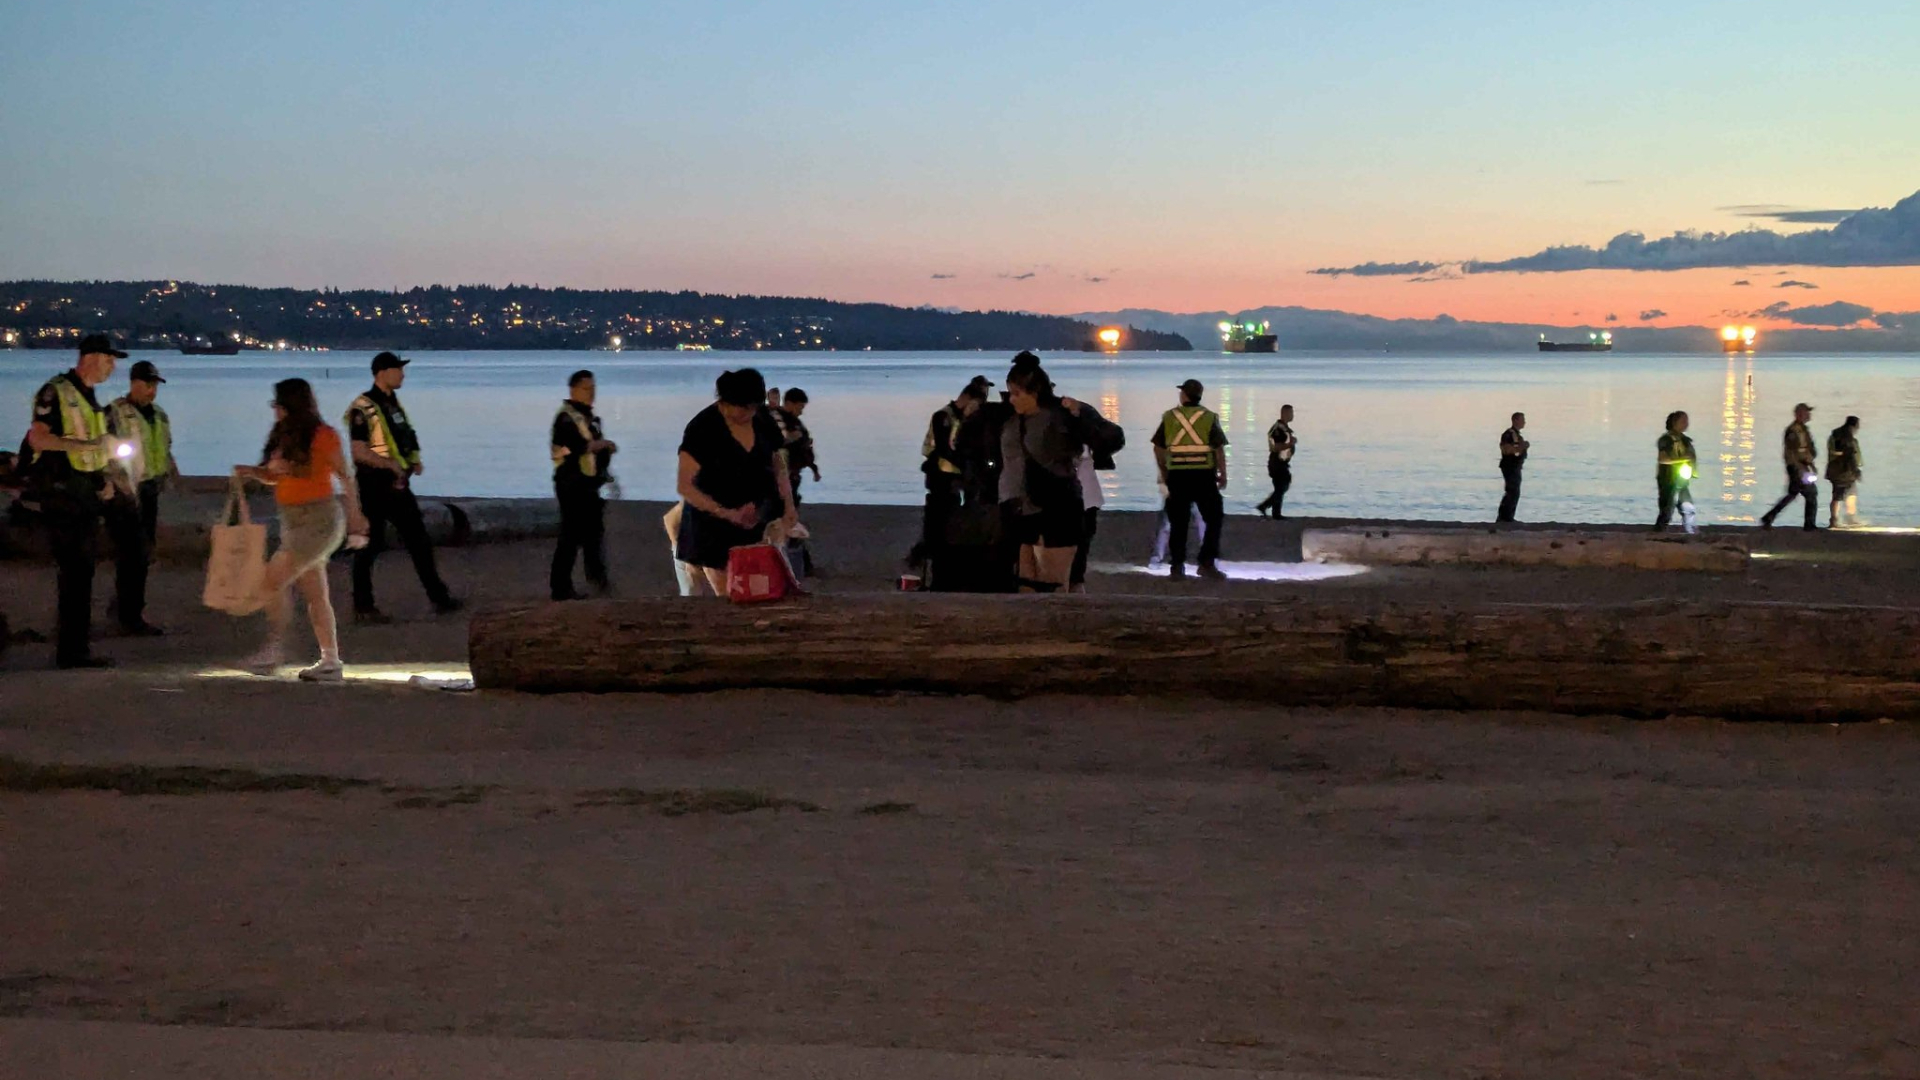 Vancouver police sunset beach sweeps raise questions